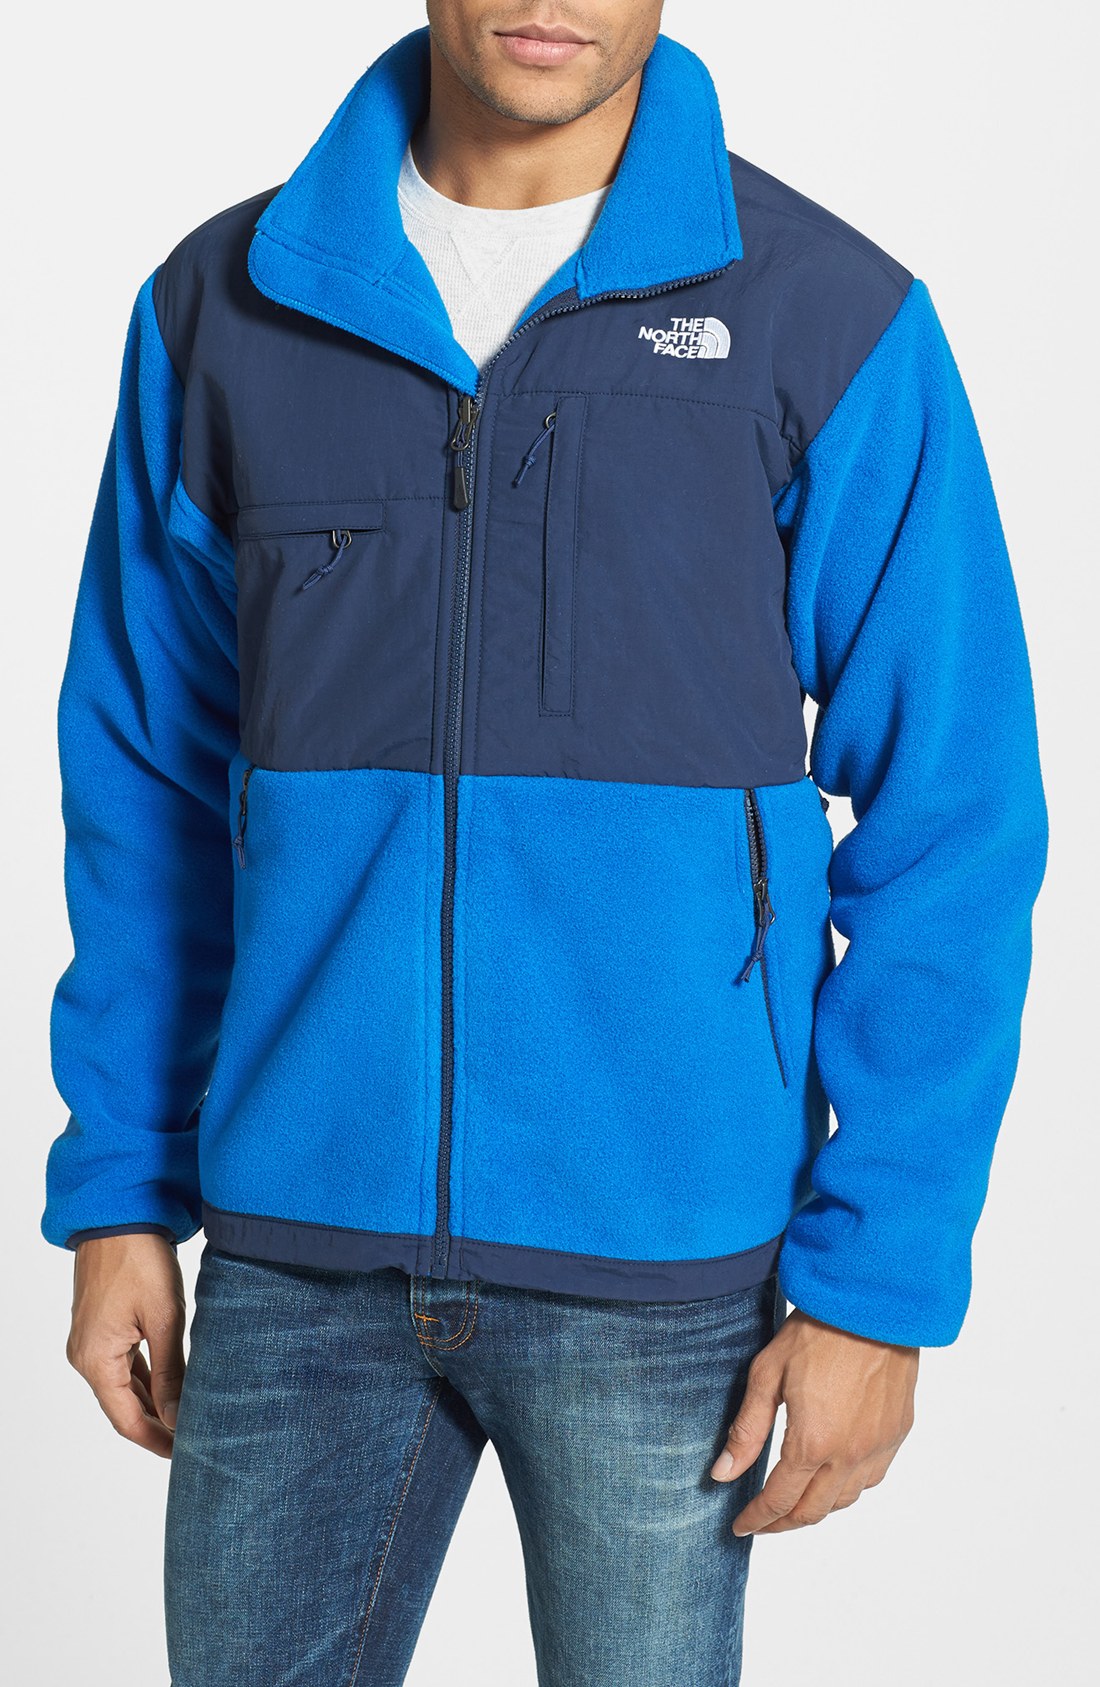 The North Face Denali Recycled Fleece Hooded Jacket in Blue for Men